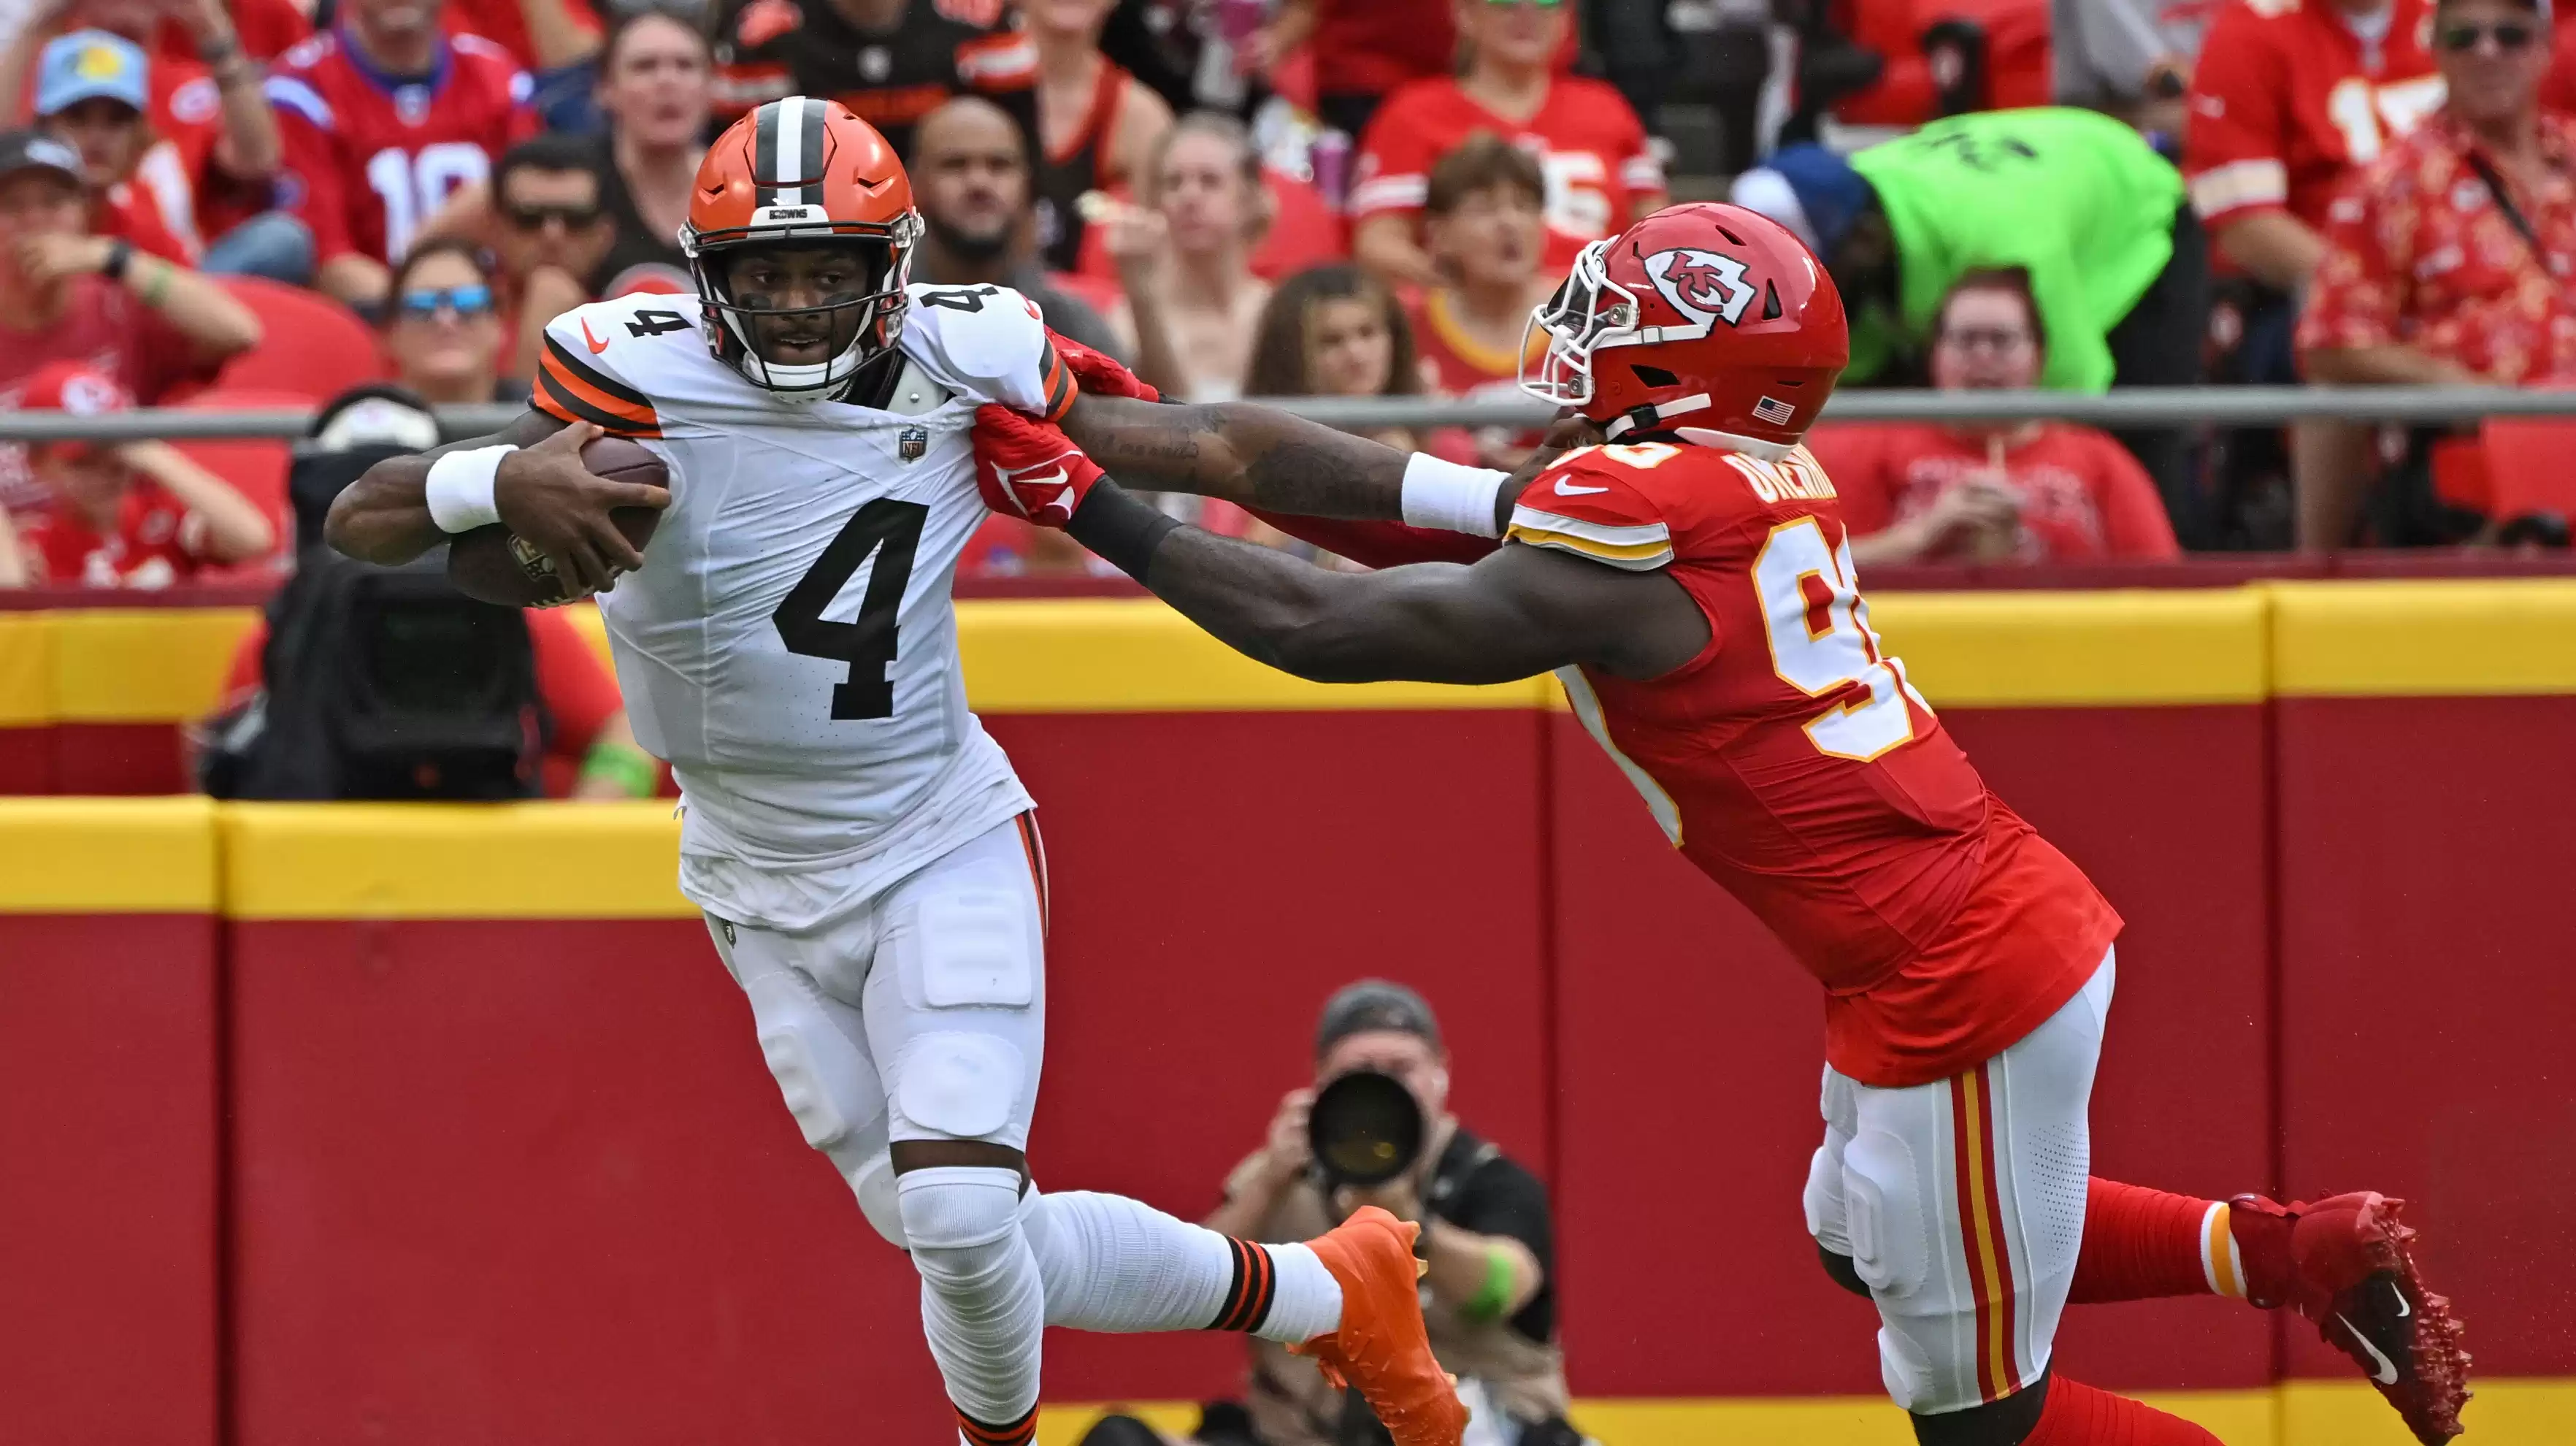 Deshaun Watson Leads Browns to 2 Touchdowns in Loss to Chiefs